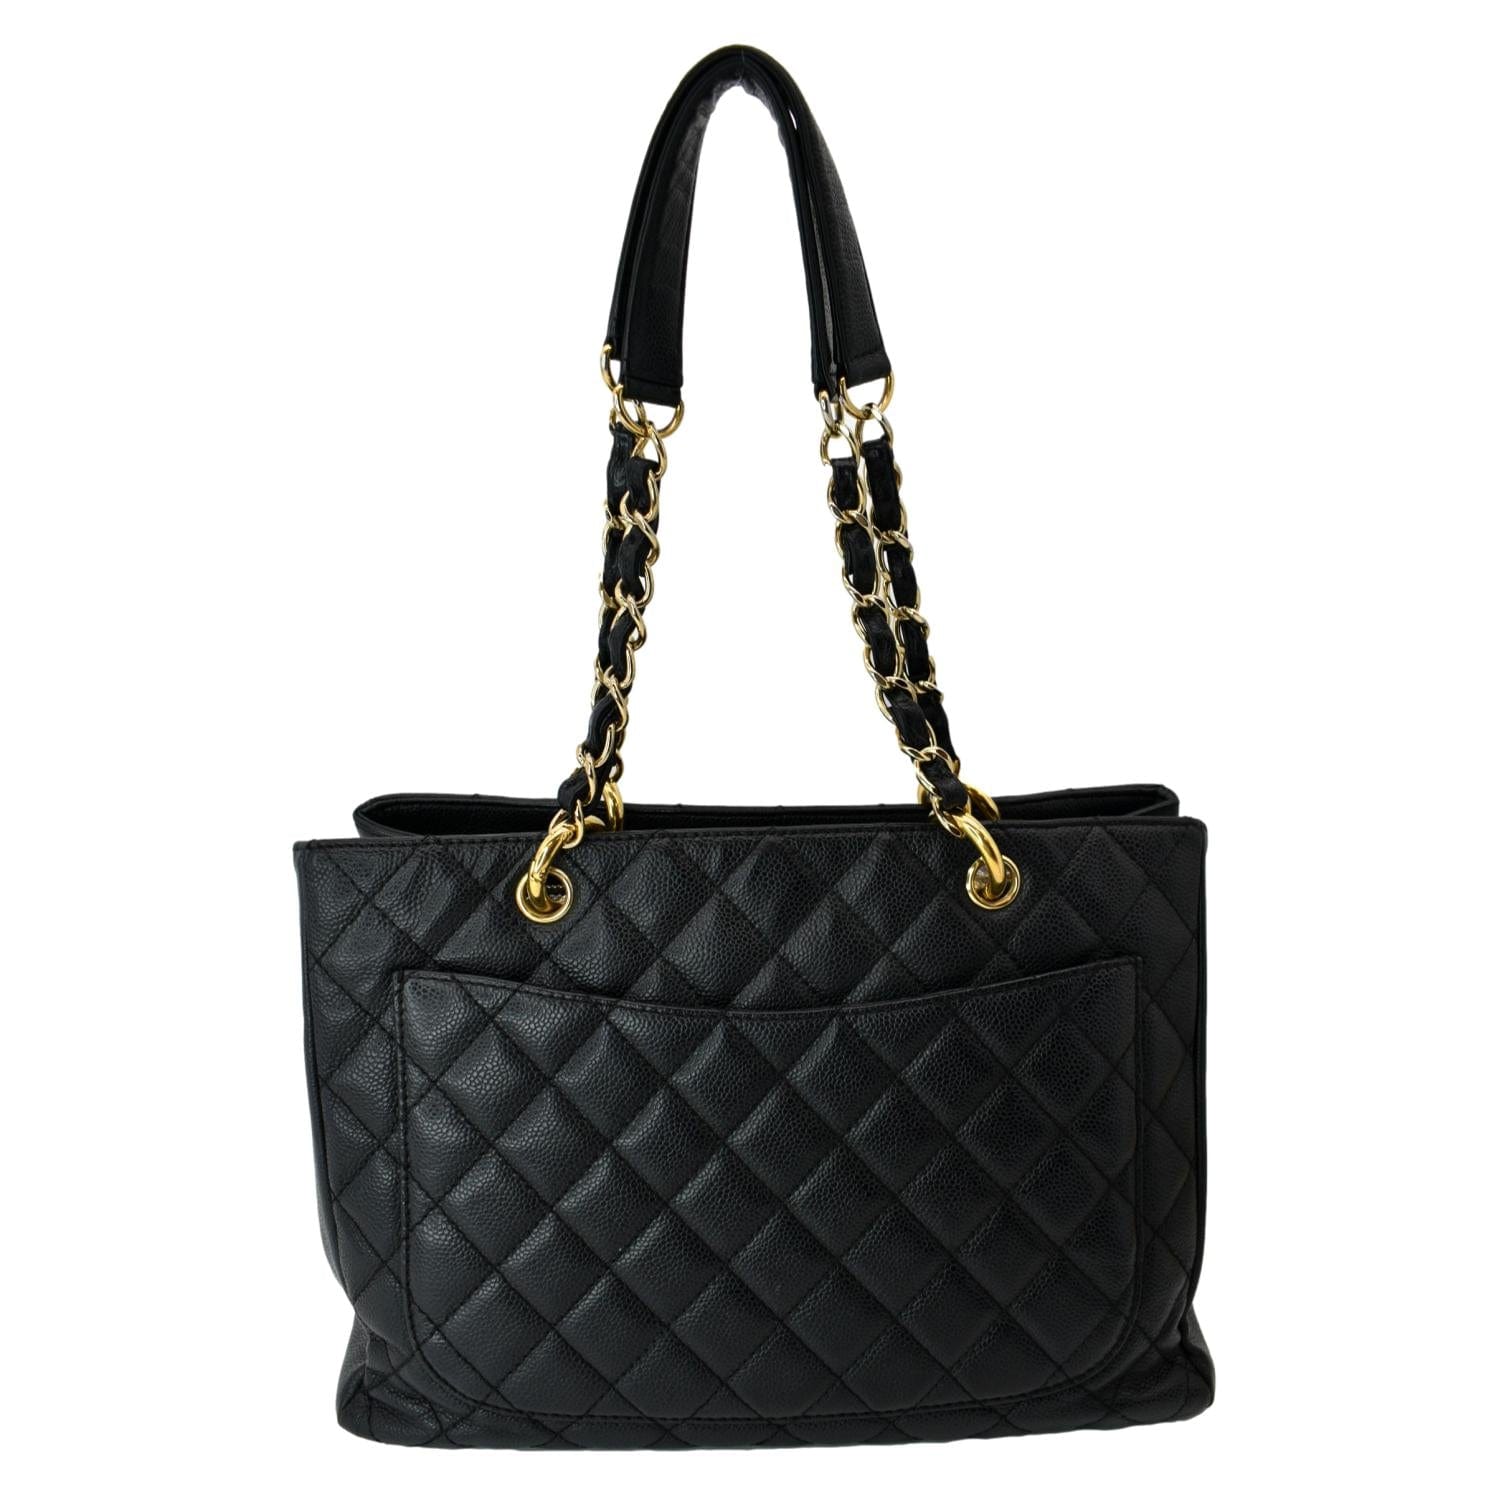 Chanel Grand Shopping Tote GST in black caviar leather with gold har